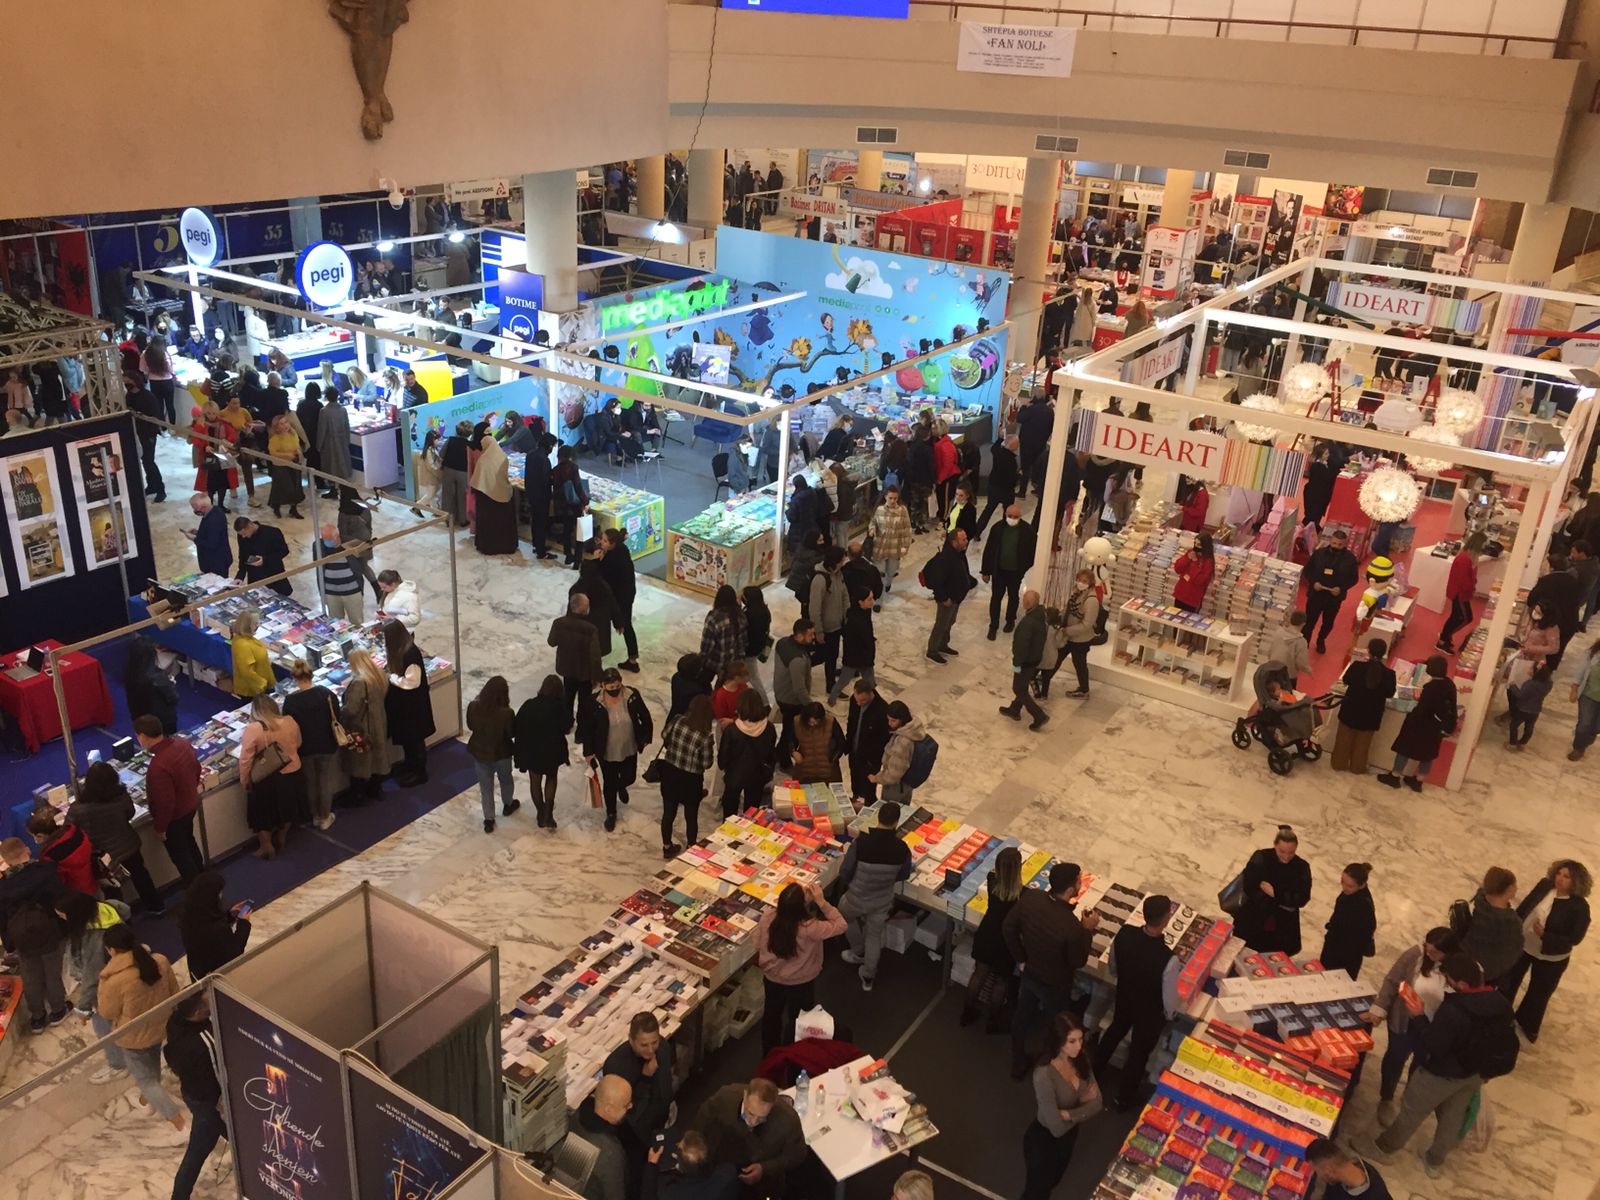 COVID-19 Measures Not Respected at Book Fair Amid European Fourth Wave